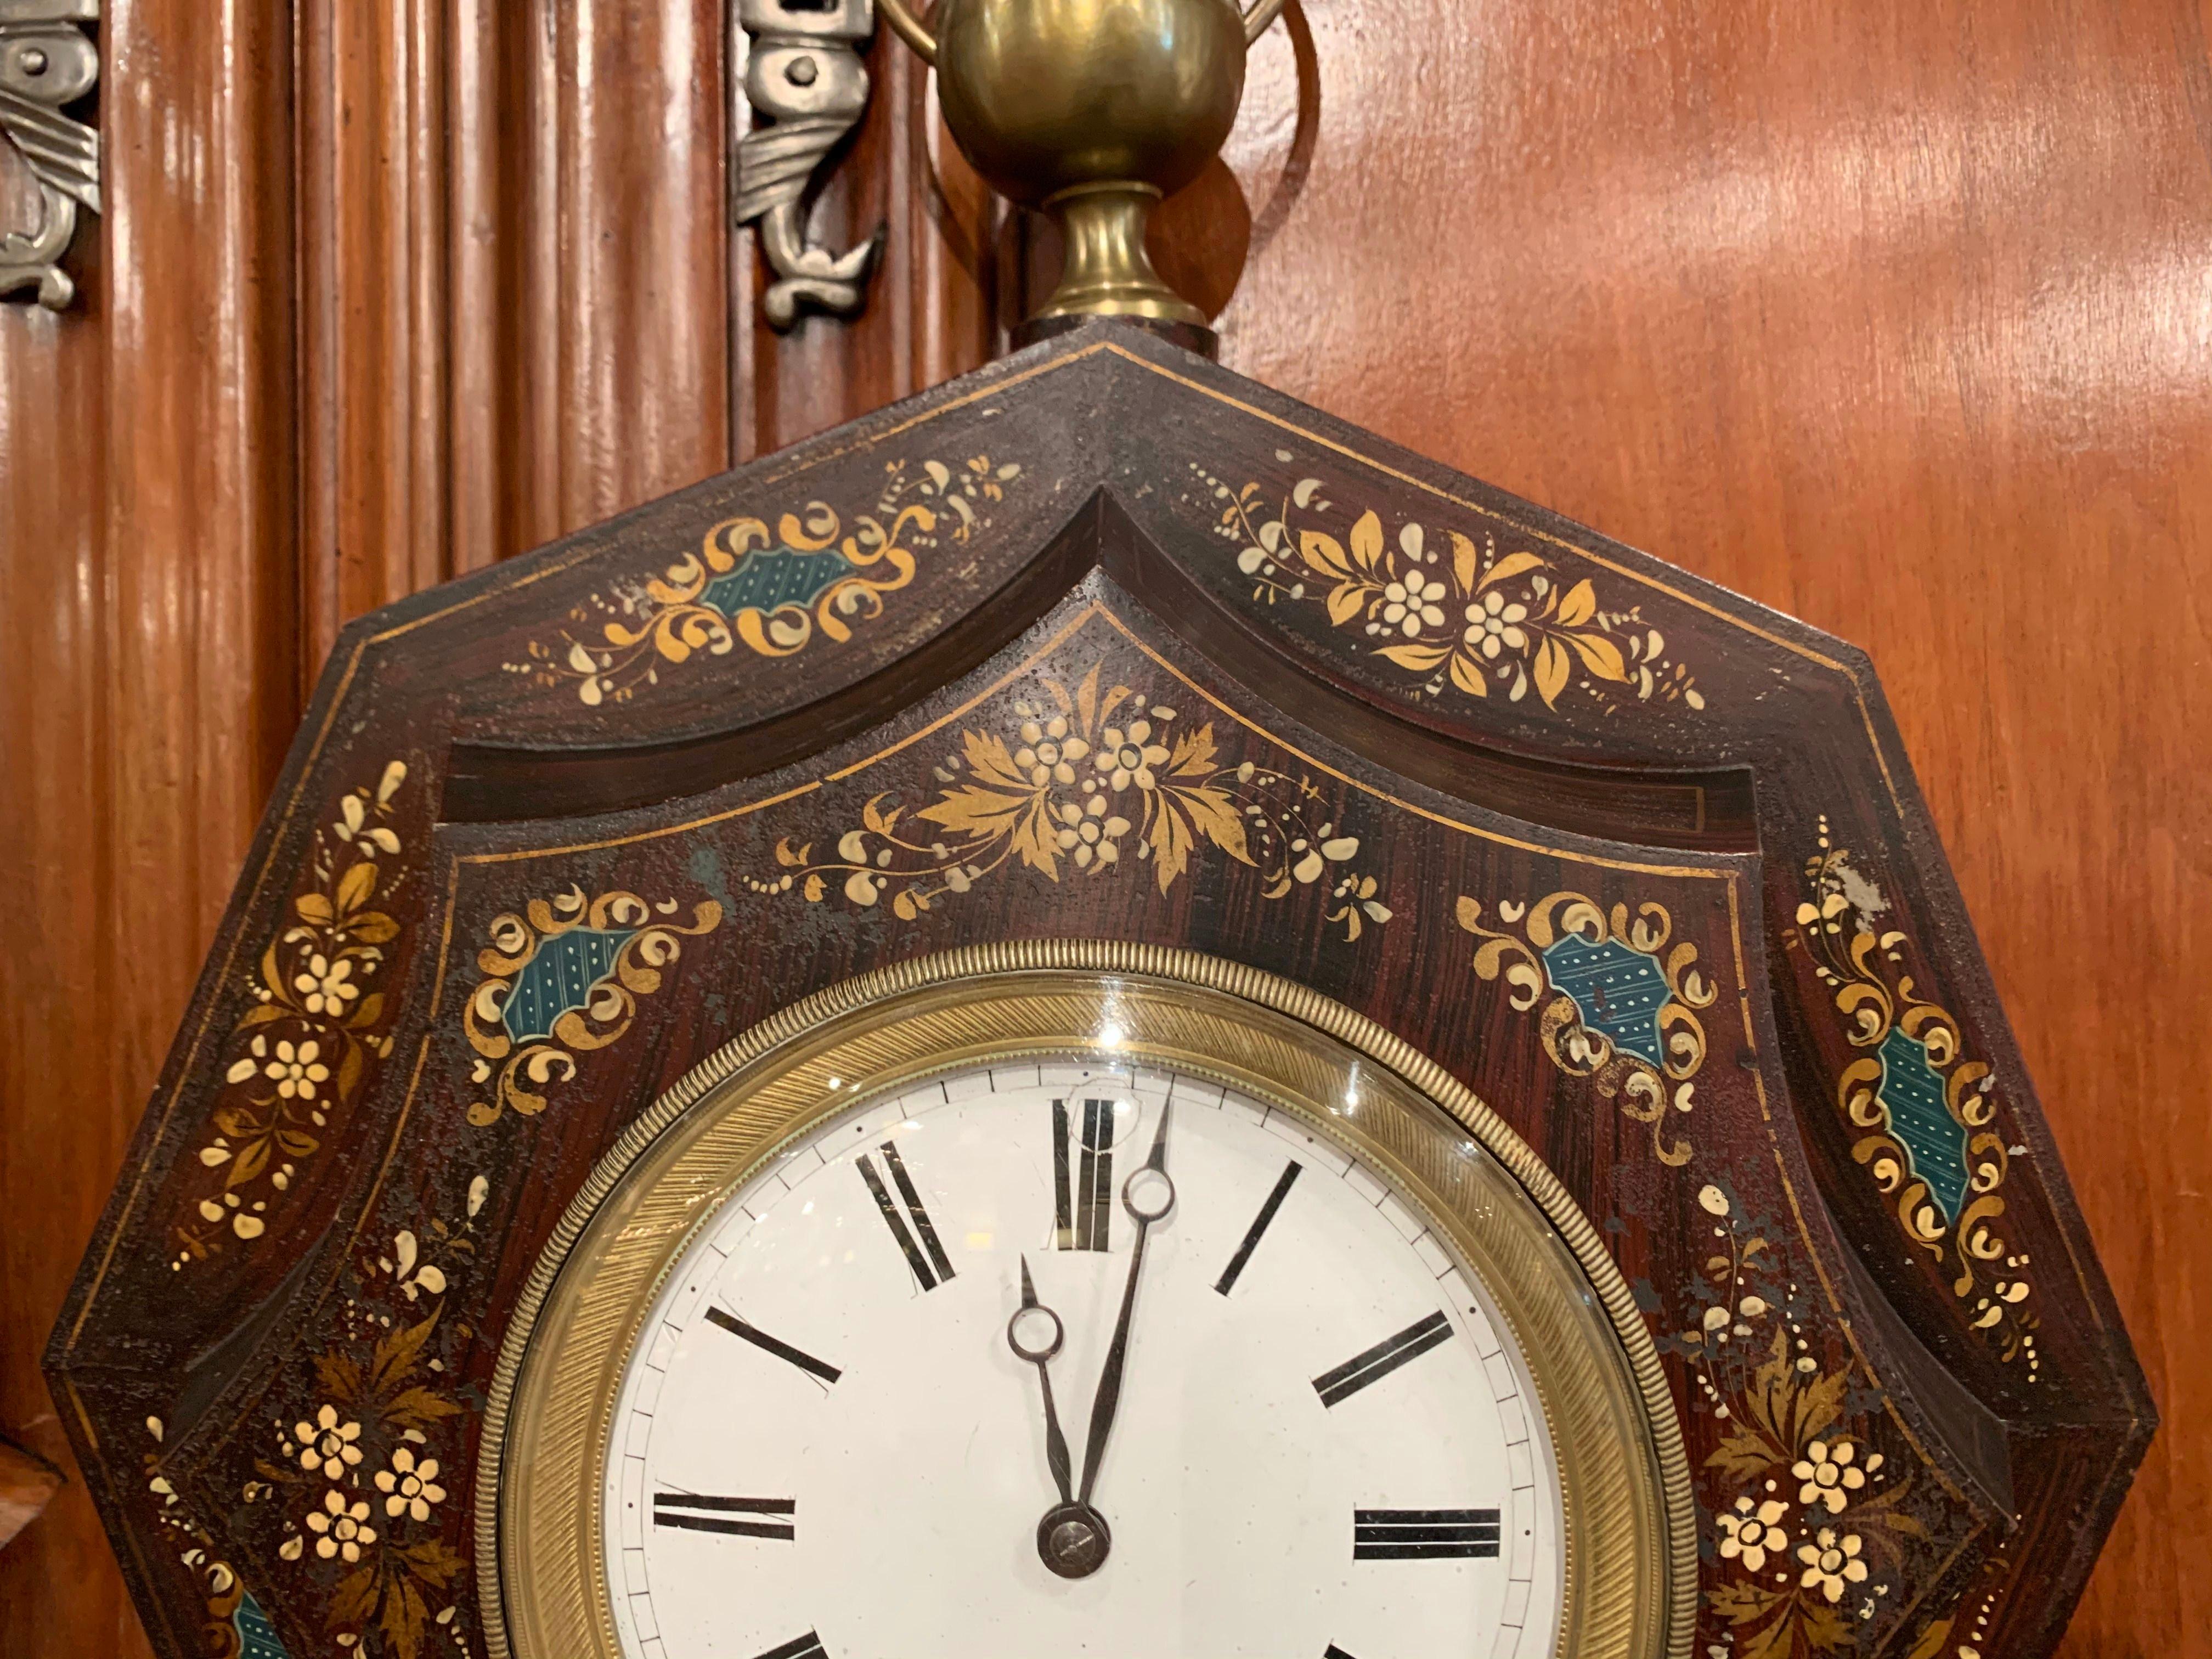 This feminine wall clock was created in France, circa 1870. Octagonal in shape, the antique tole time keeper features a decorative round brass finial at the top and embellished with a brass rim around the front door; the clock has a rich, black